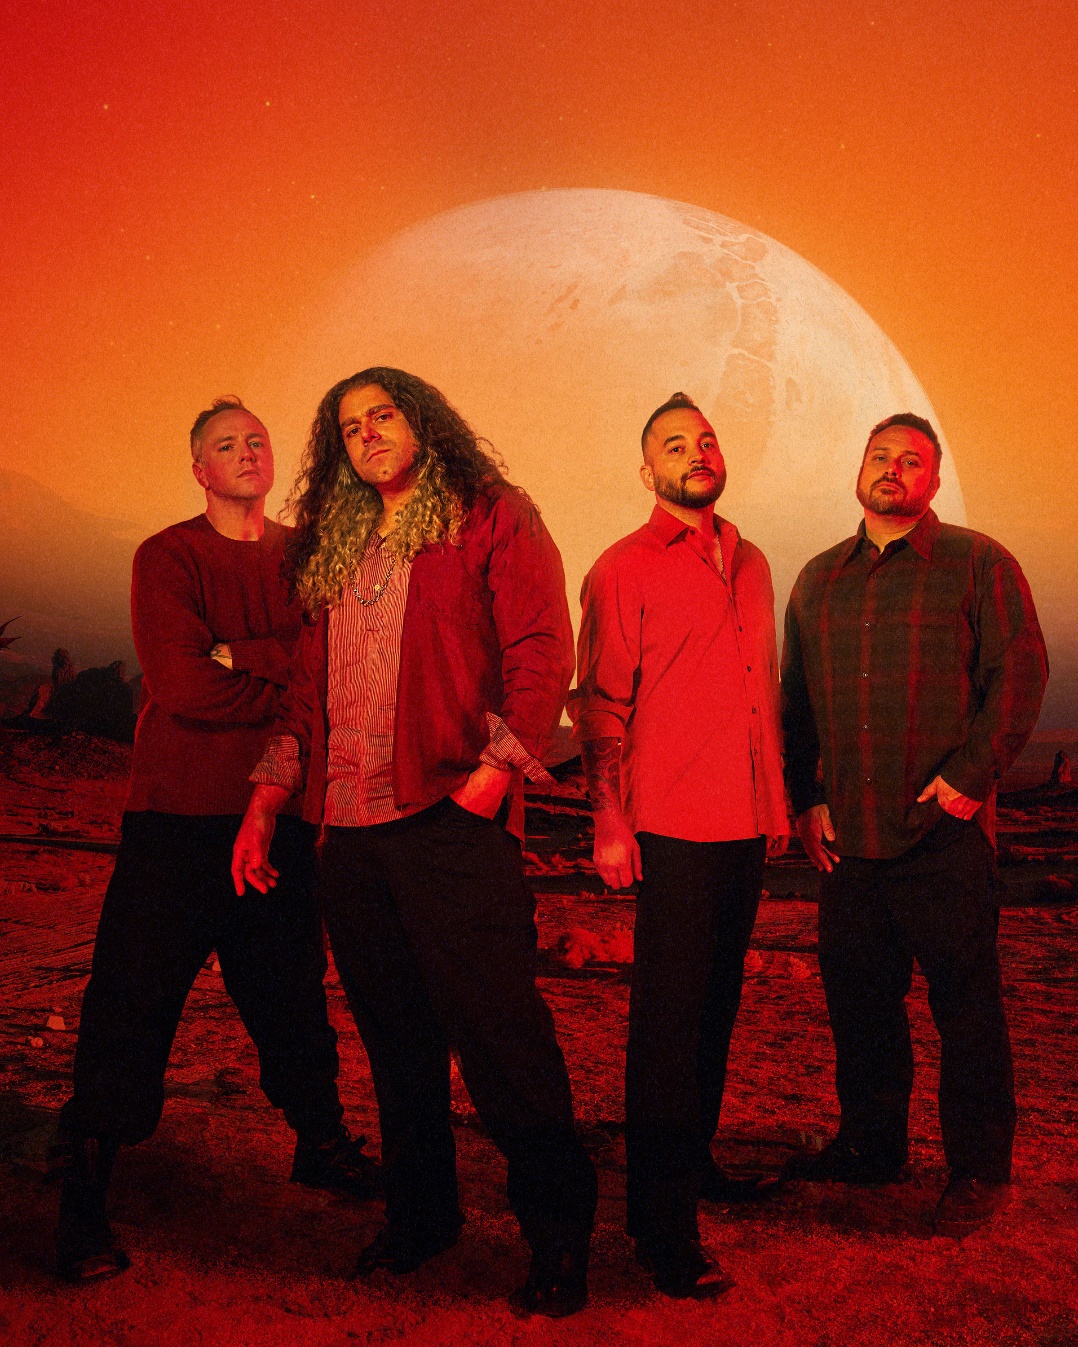  Coheed and Cambria announce “Neverender: No World for a Waking Mind” tour 